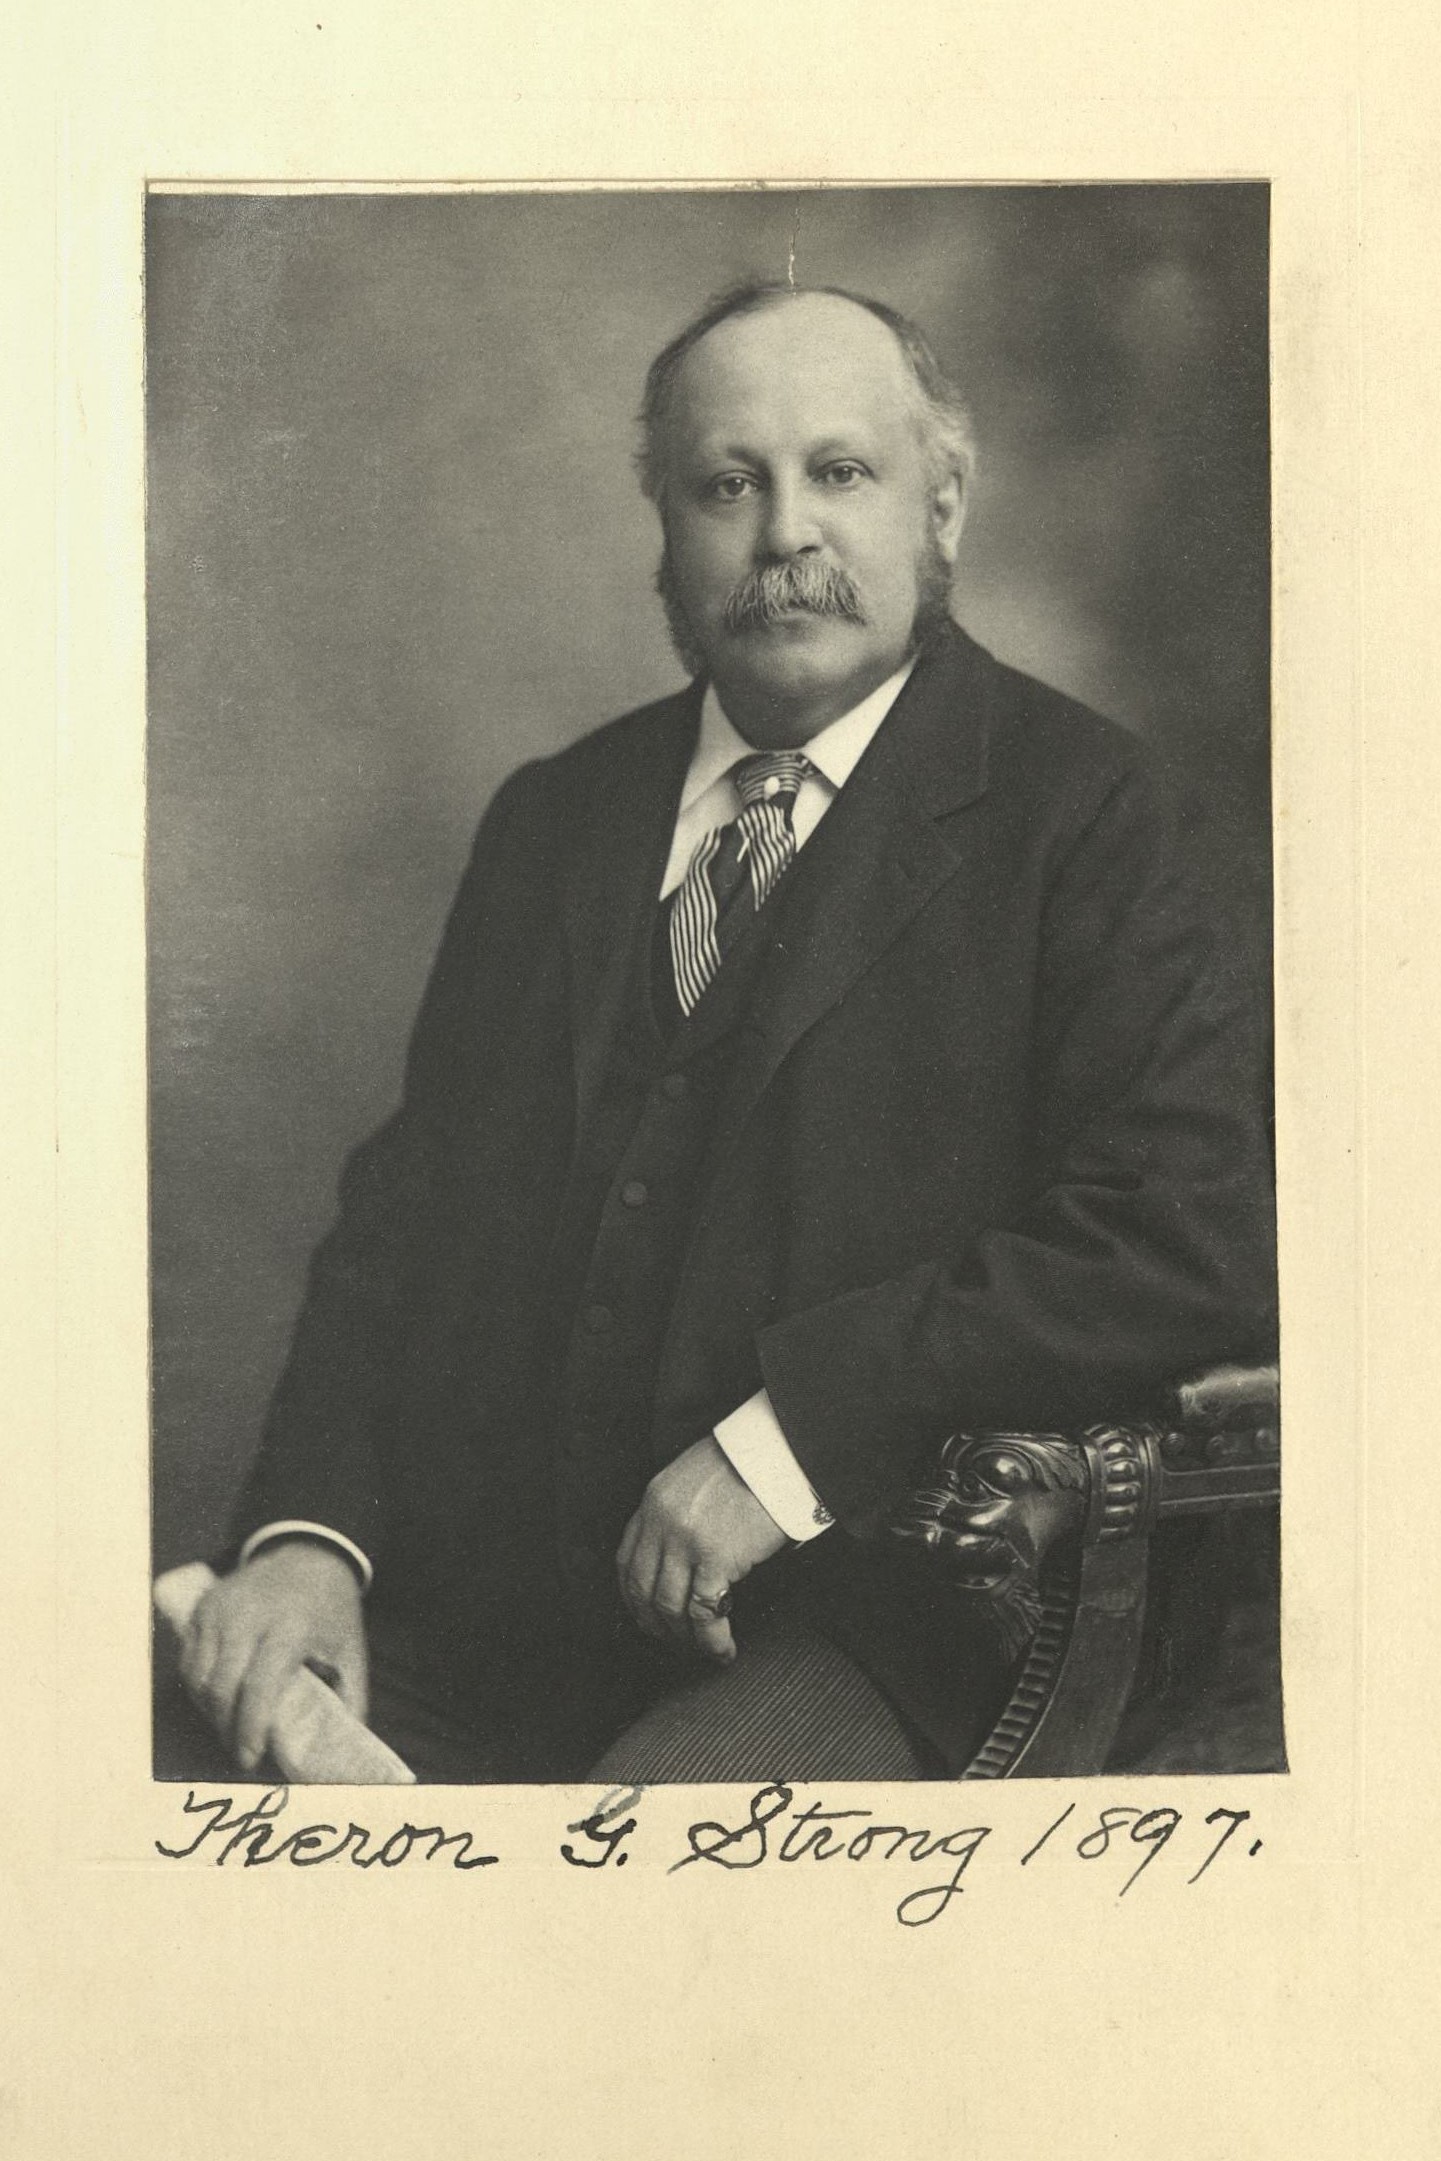 Member portrait of Theron G. Strong